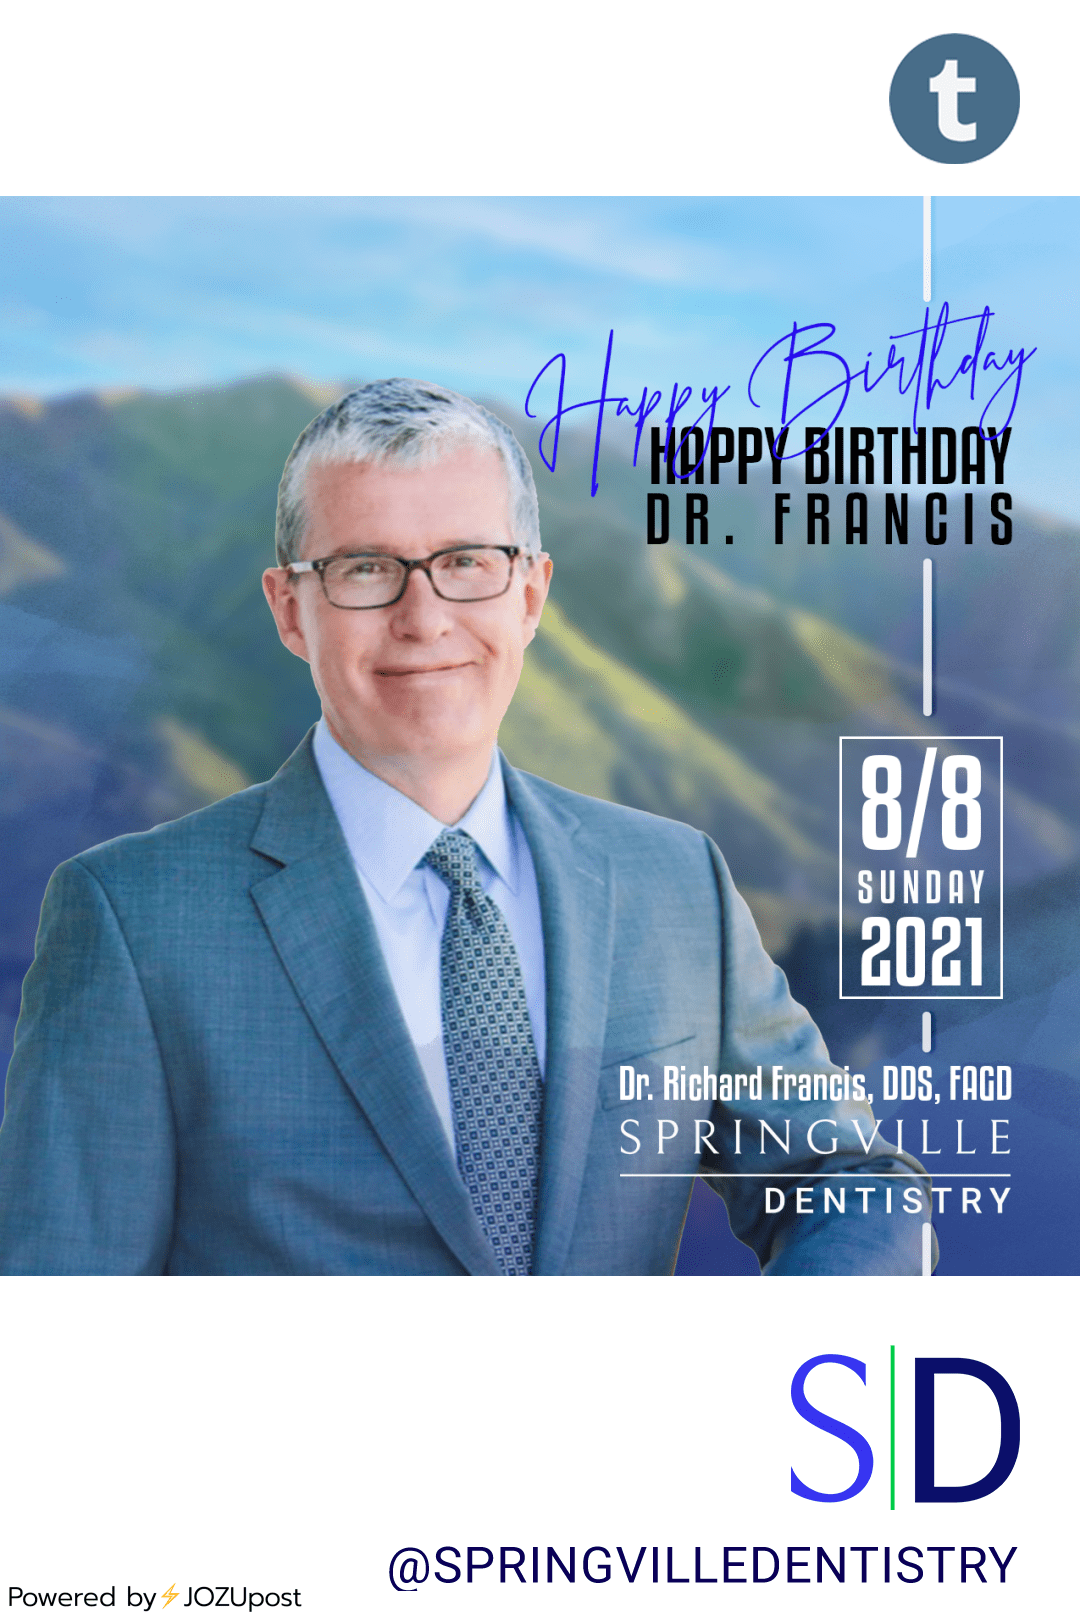 Happy Birthday, Dr. Richard Francis!
🎉🎂🎈🥳
It is the best to have Dr. Francis at Springville Dentistry. We love working with him!
Dr. Francis is a very talented, well educated, and skilled dentist with a great personality, good management and...